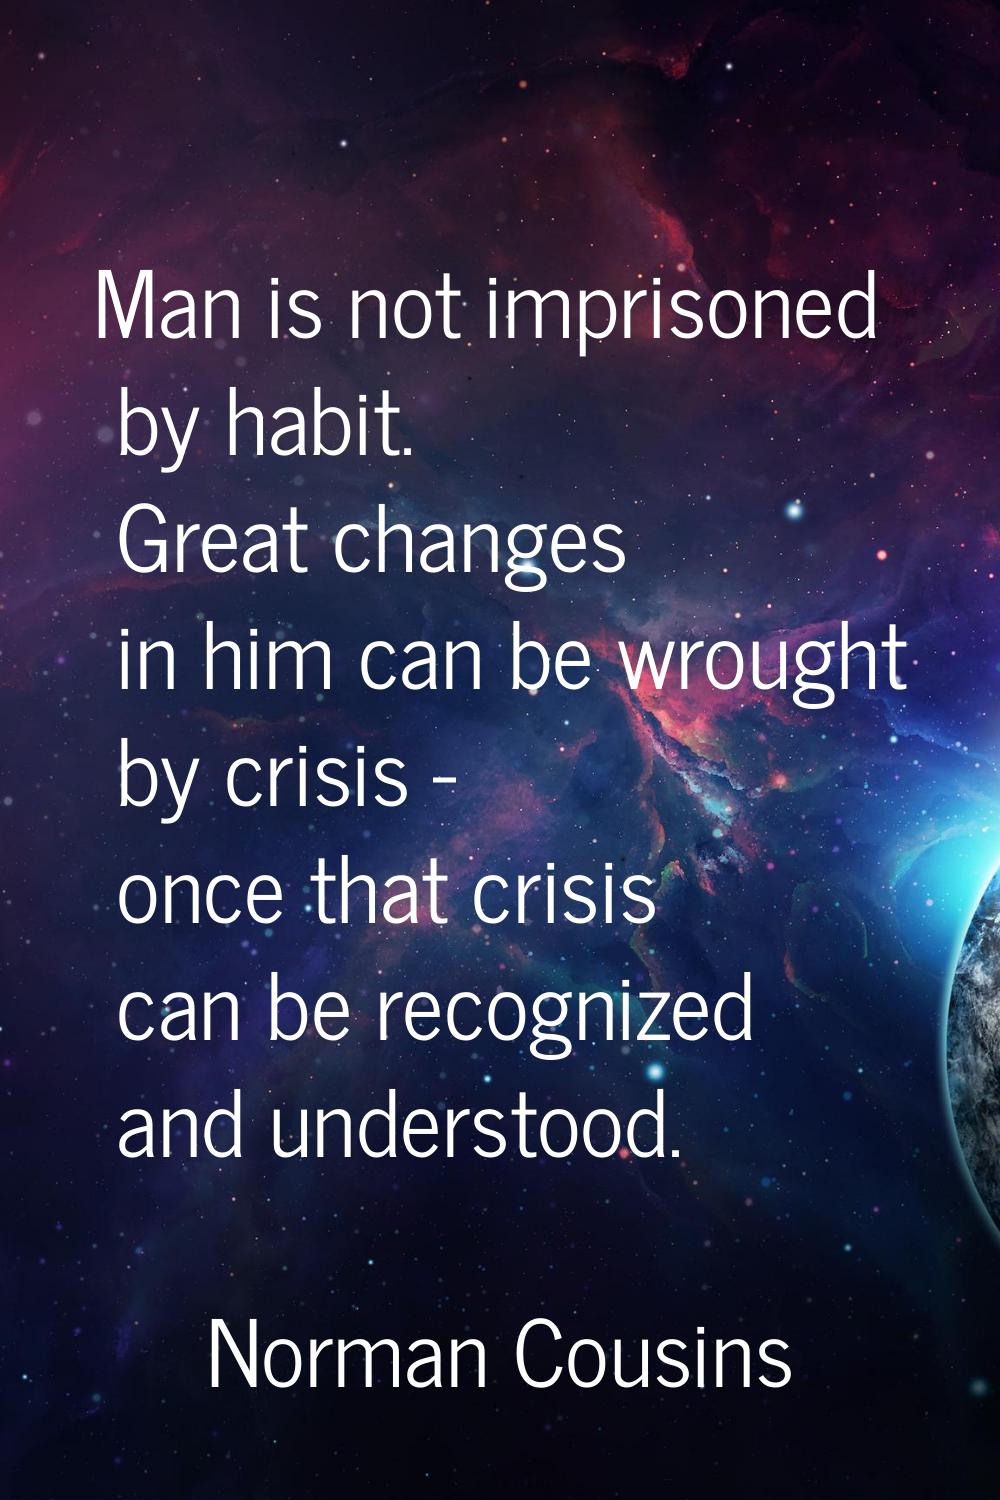 Man is not imprisoned by habit. Great changes in him can be wrought by crisis - once that crisis ca